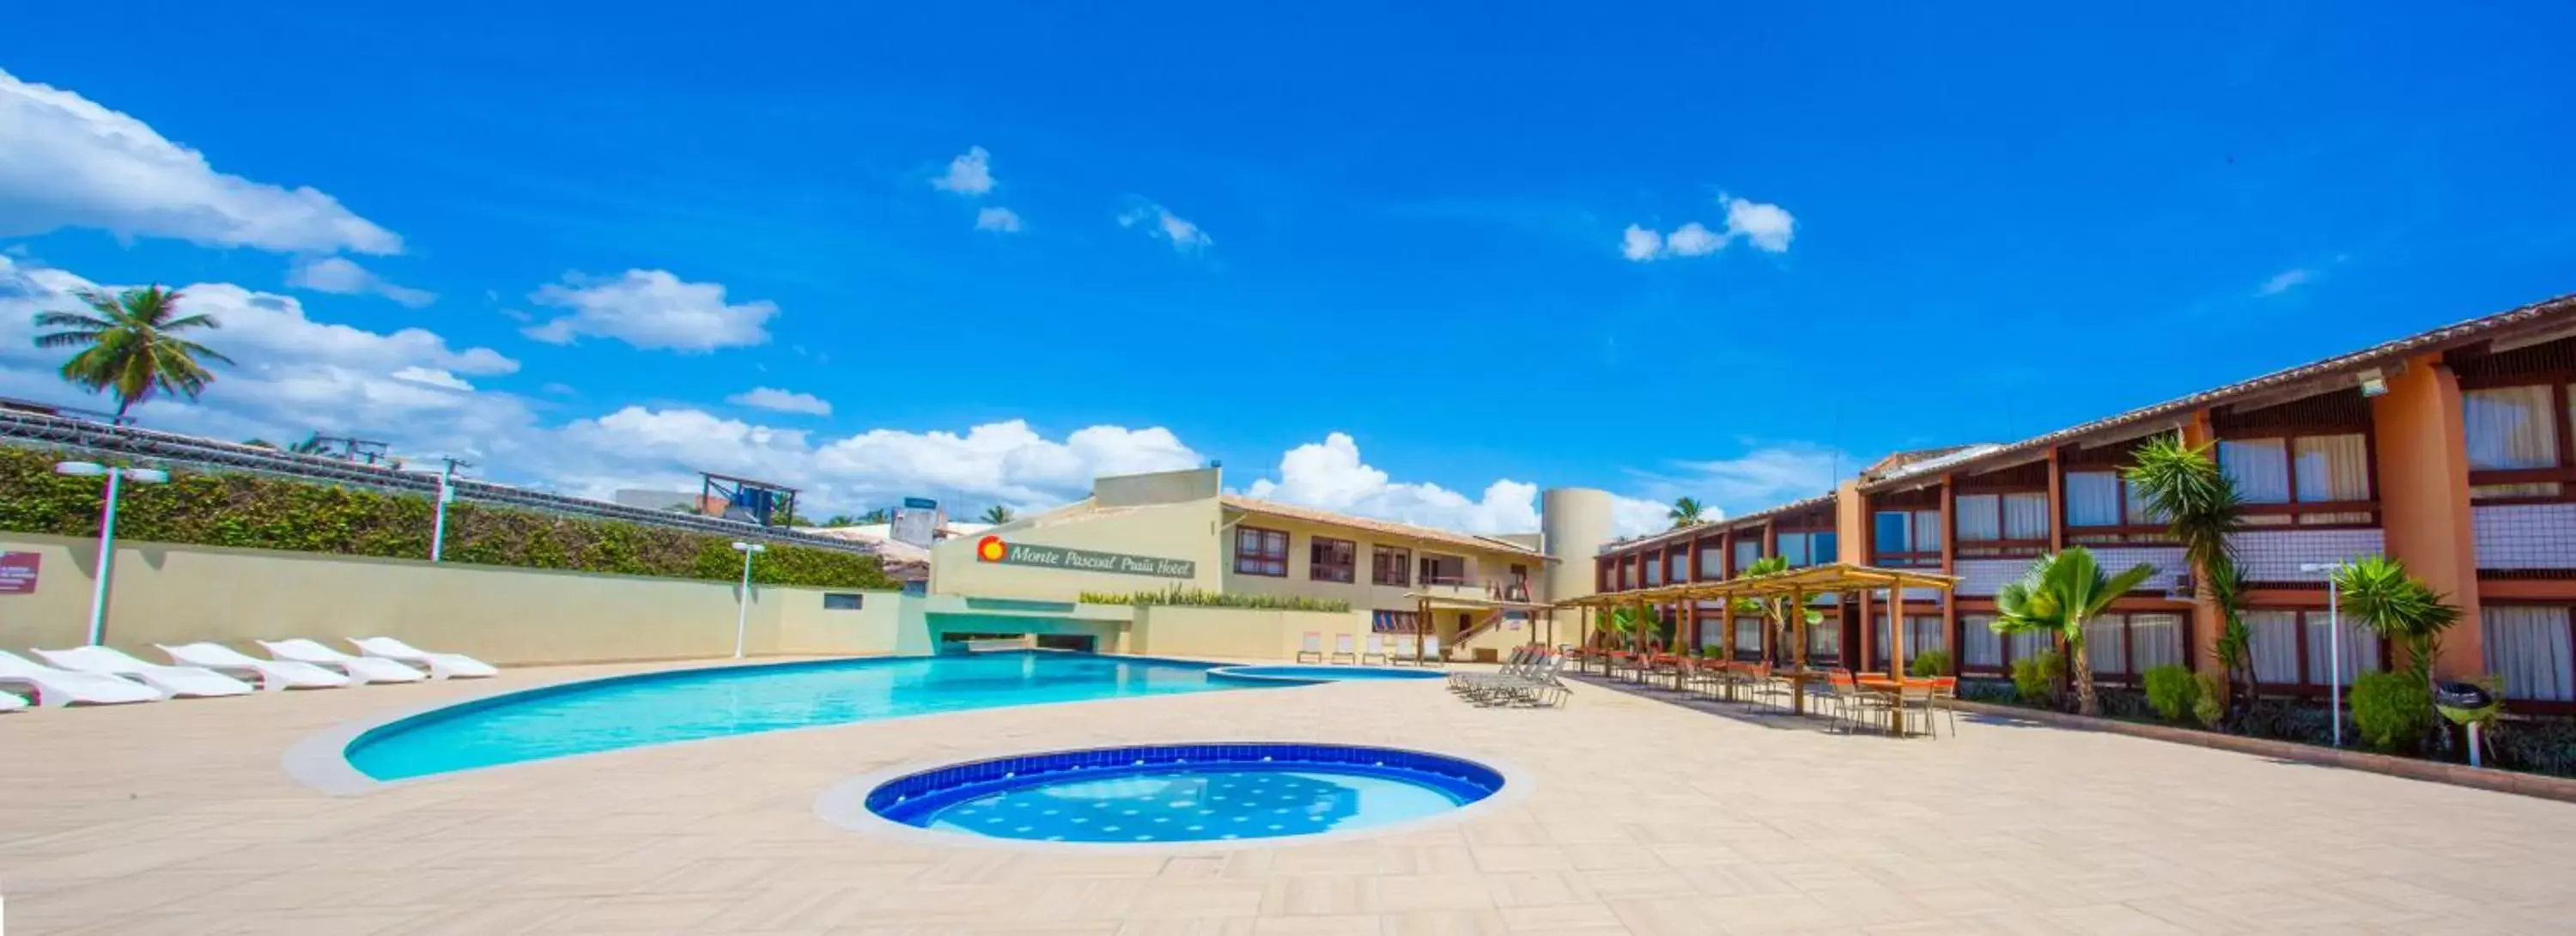 Property building, Swimming Pool in Monte Pascoal Praia Hotel